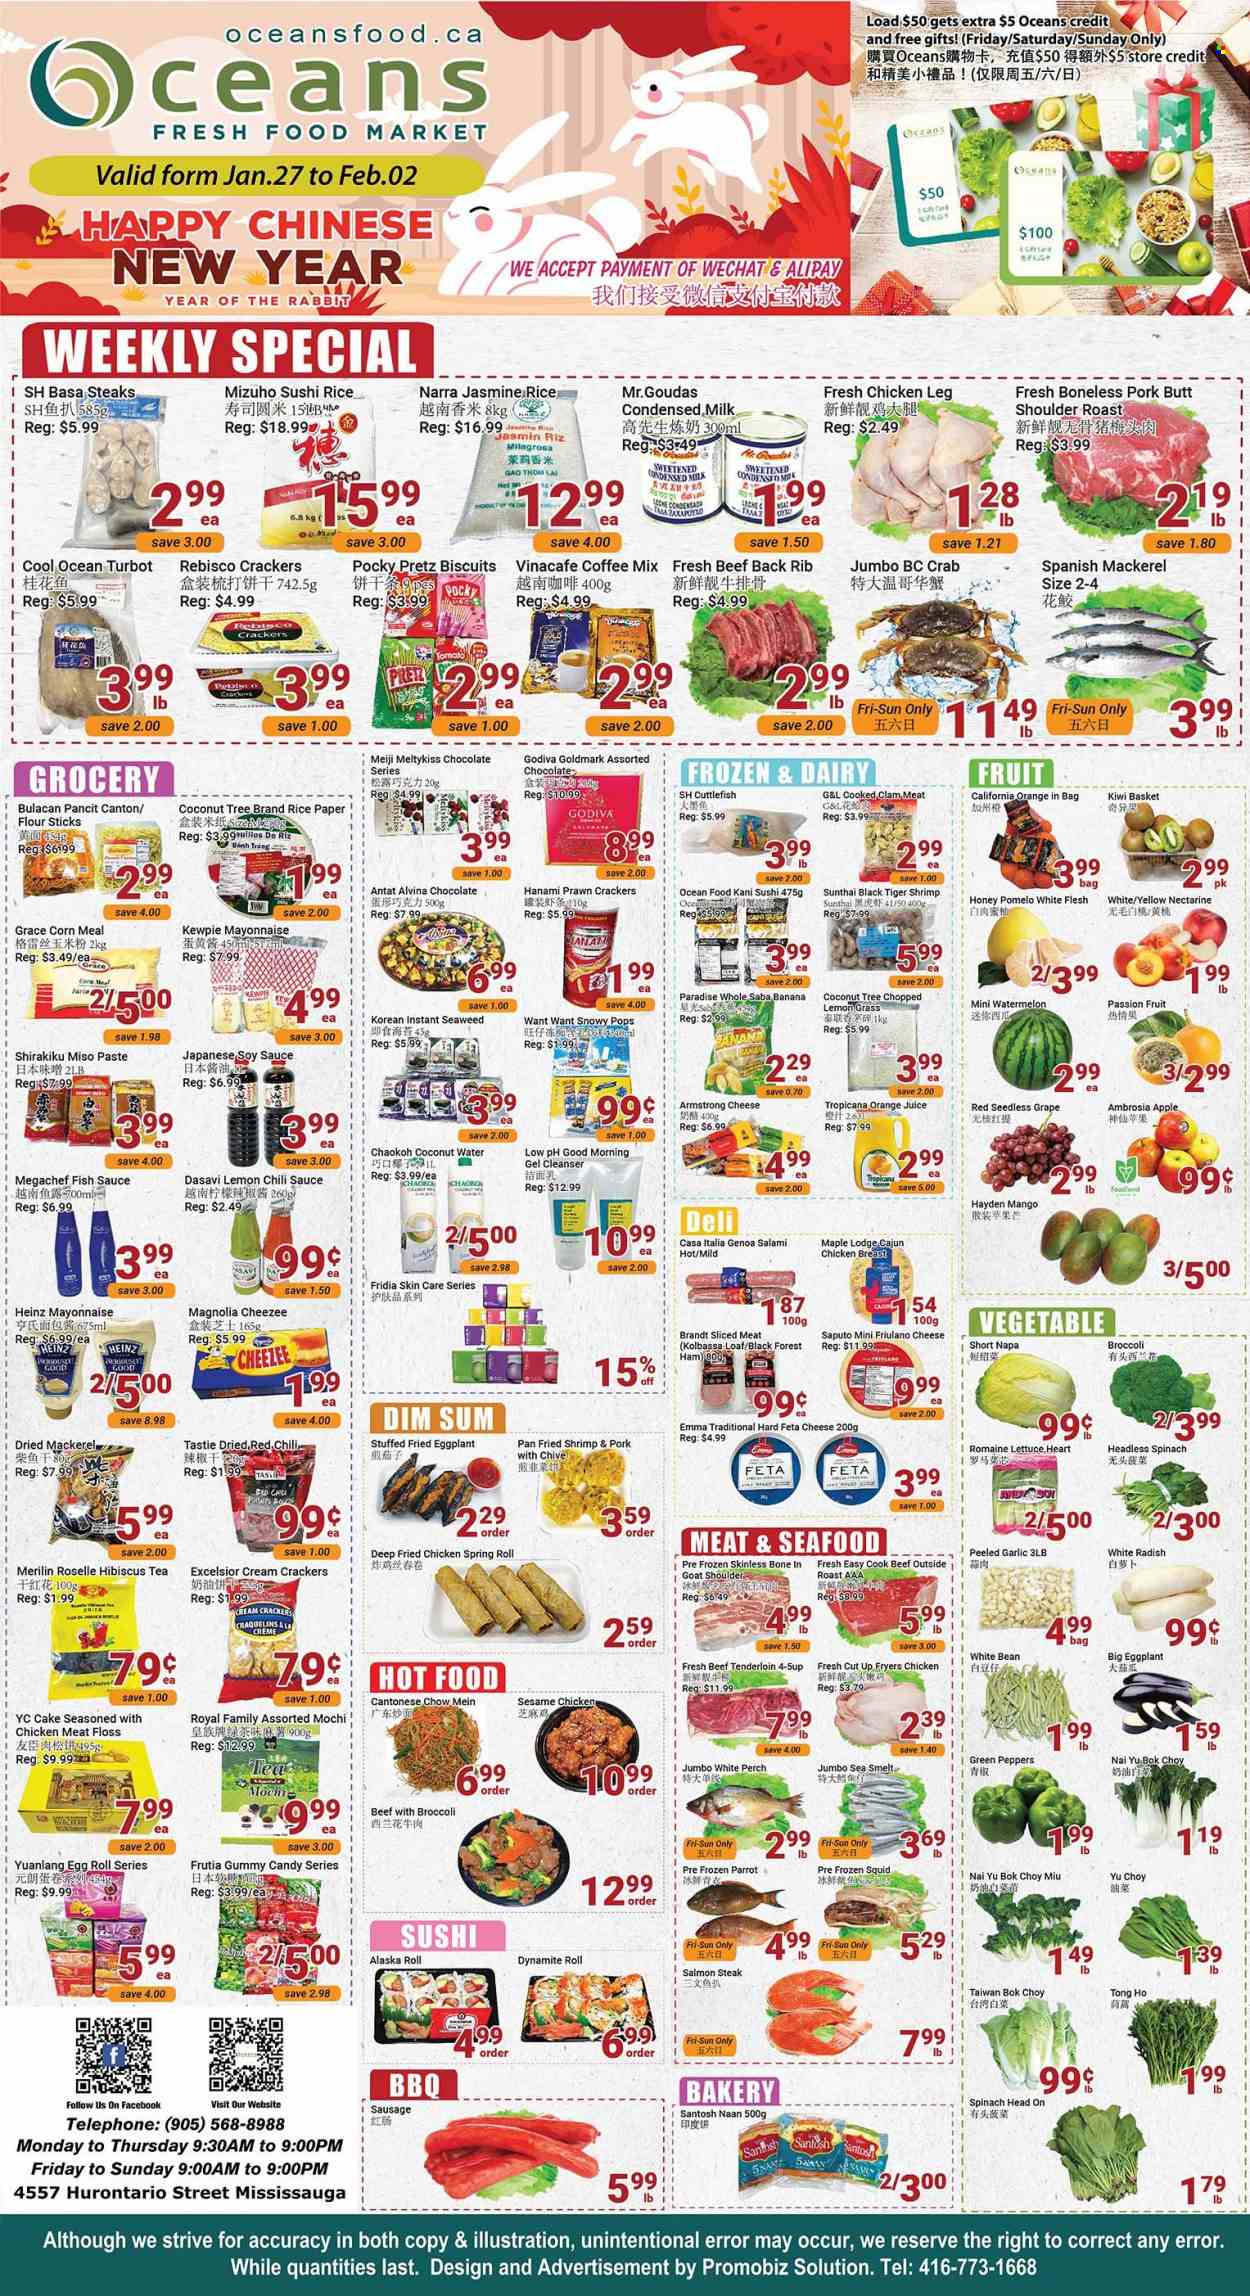 thumbnail - Oceans Flyer - January 27, 2023 - February 02, 2023 - Sales products - cake, bok choy, broccoli, corn, garlic, radishes, peppers, eggplant, white radish, nectarines, watermelon, pomelo, clams, cuttlefish, mackerel, salmon, squid, perch, turbot, seafood, prawns, crab, fish, shrimps, sauce, egg rolls, fried chicken, salami, ham, sausage, cheese, feta, milk, condensed milk, eggs, mayonnaise, rabbit, chocolate, Godiva, crackers, biscuit, flour, seaweed, jasmine rice, fish sauce, miso, soy sauce, chilli sauce, honey, orange juice, juice, coconut water, tea, coffee, chicken breasts, chicken legs, chicken, beef meat, beef tenderloin, Fab, cleanser, Heinz, steak. Page 1.